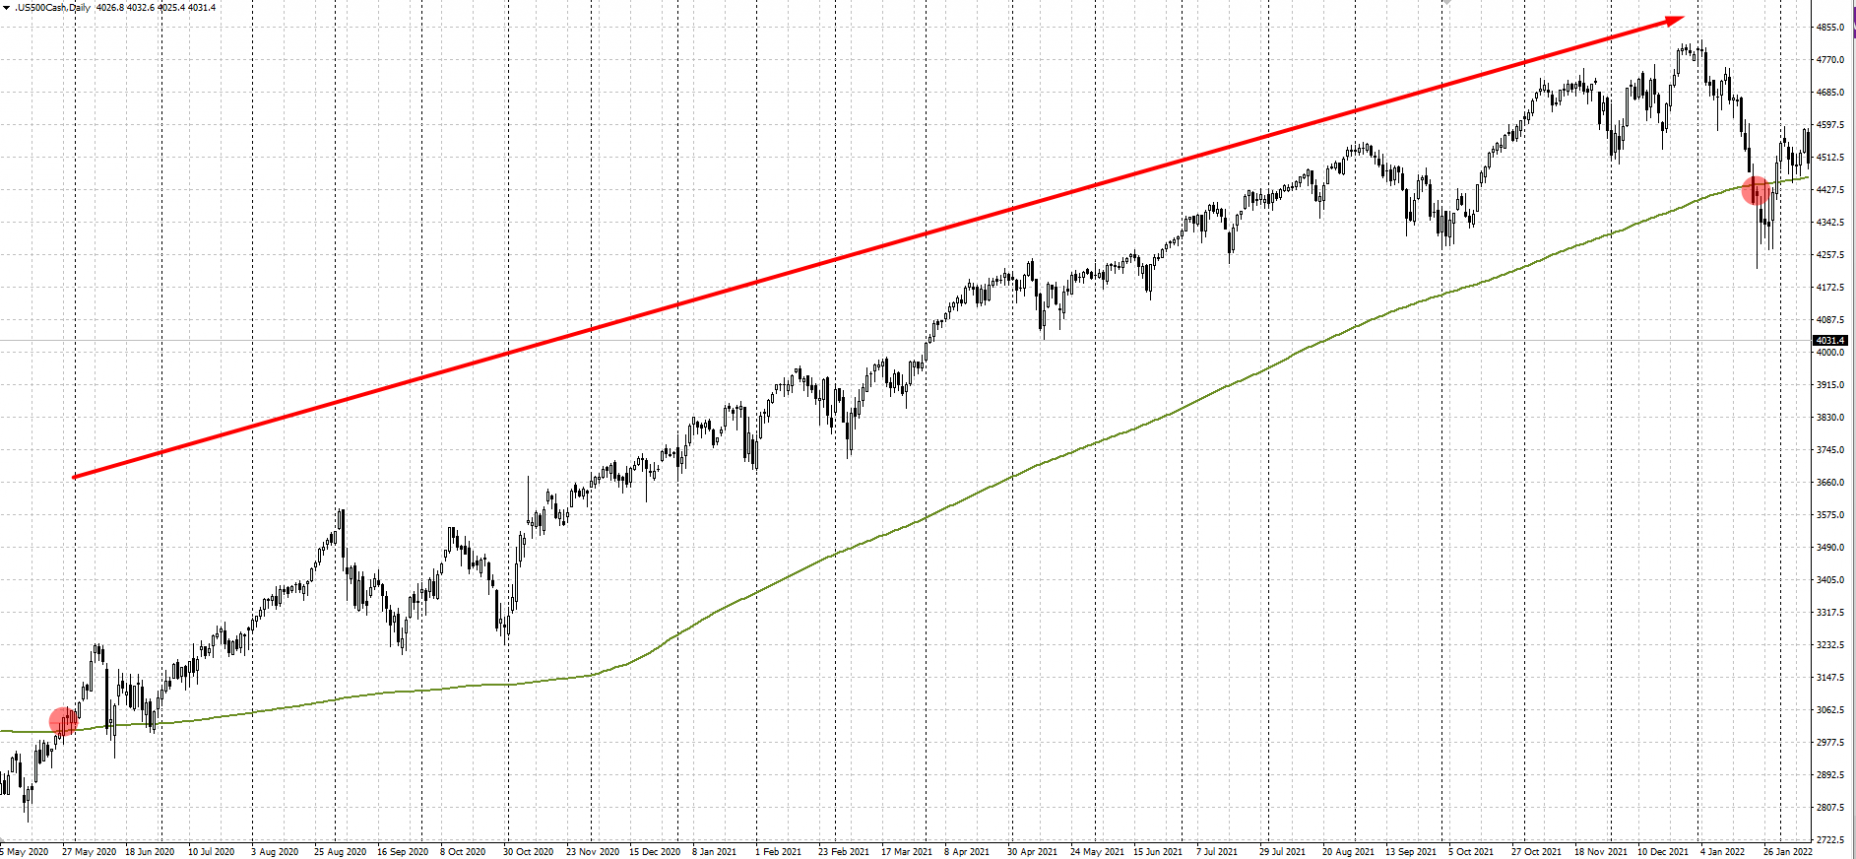 Buying example of the “S&P 500 Trend Following" strategy